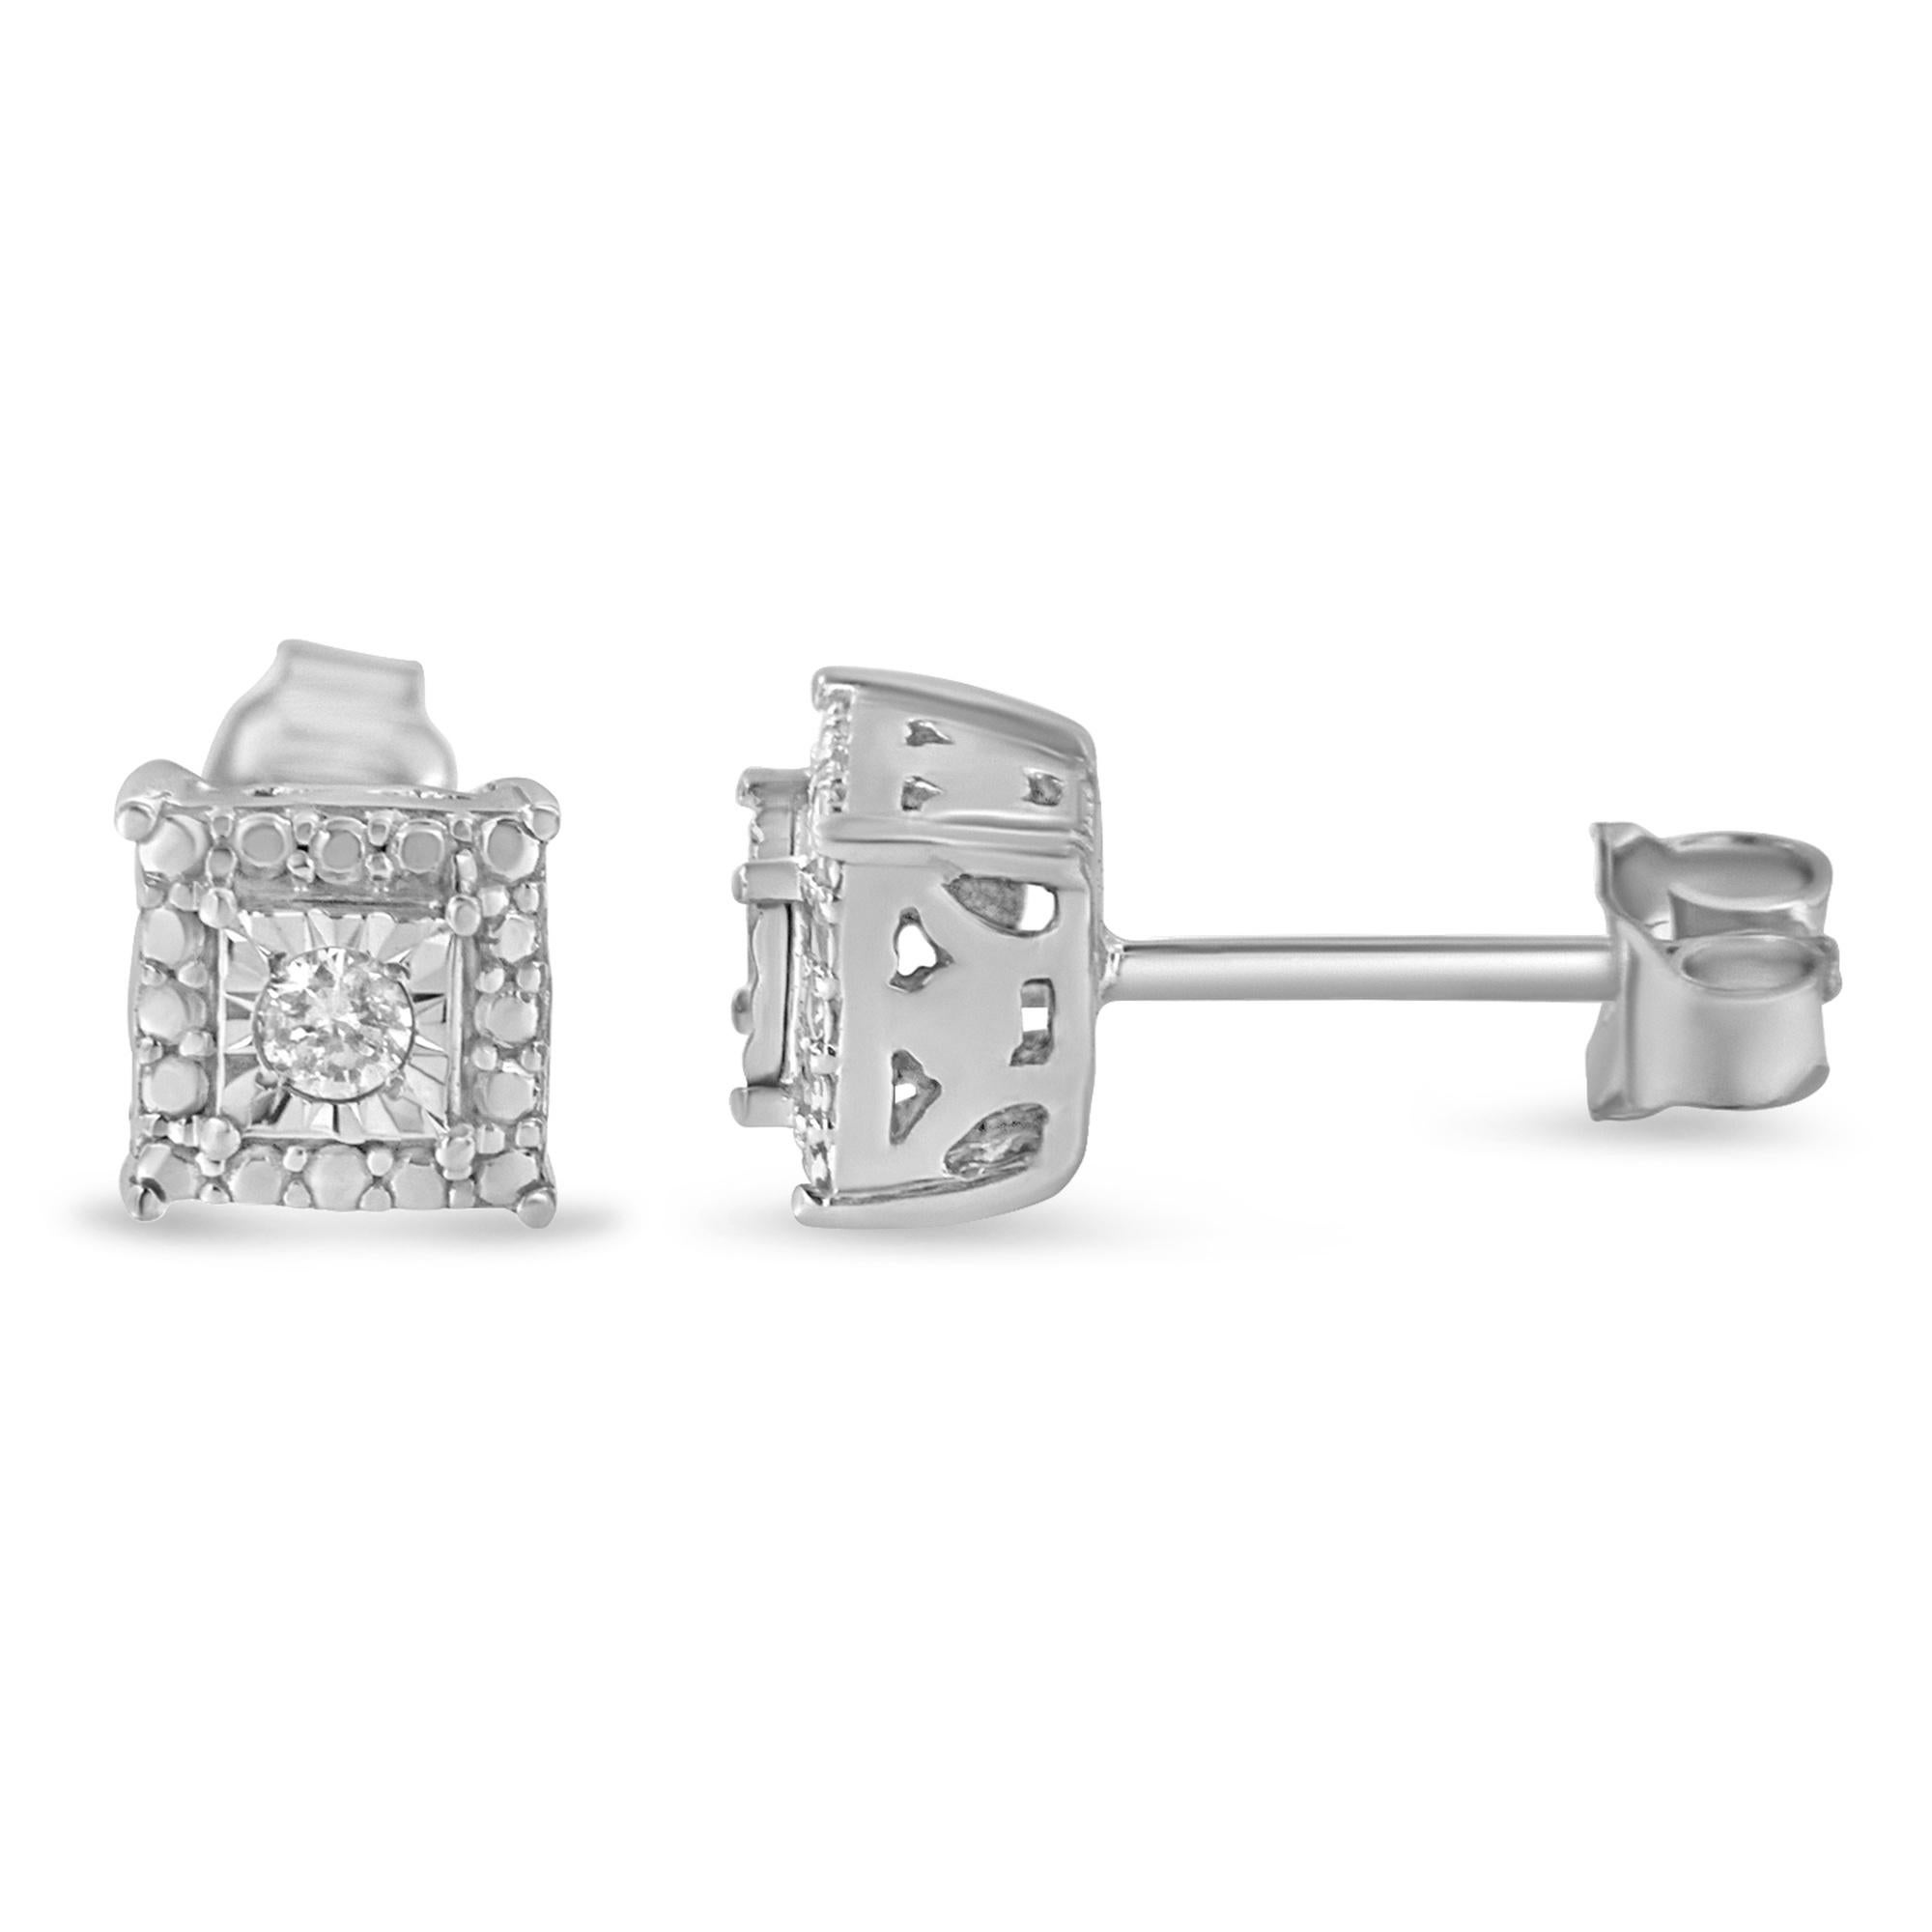 Creating the luxurious illusion of various diamonds, these beautiful earrings are formed in a square shape. Constructed of rich sterling silver, the miracle style earrings are embellished with shimmering round cut diamonds. The look of these